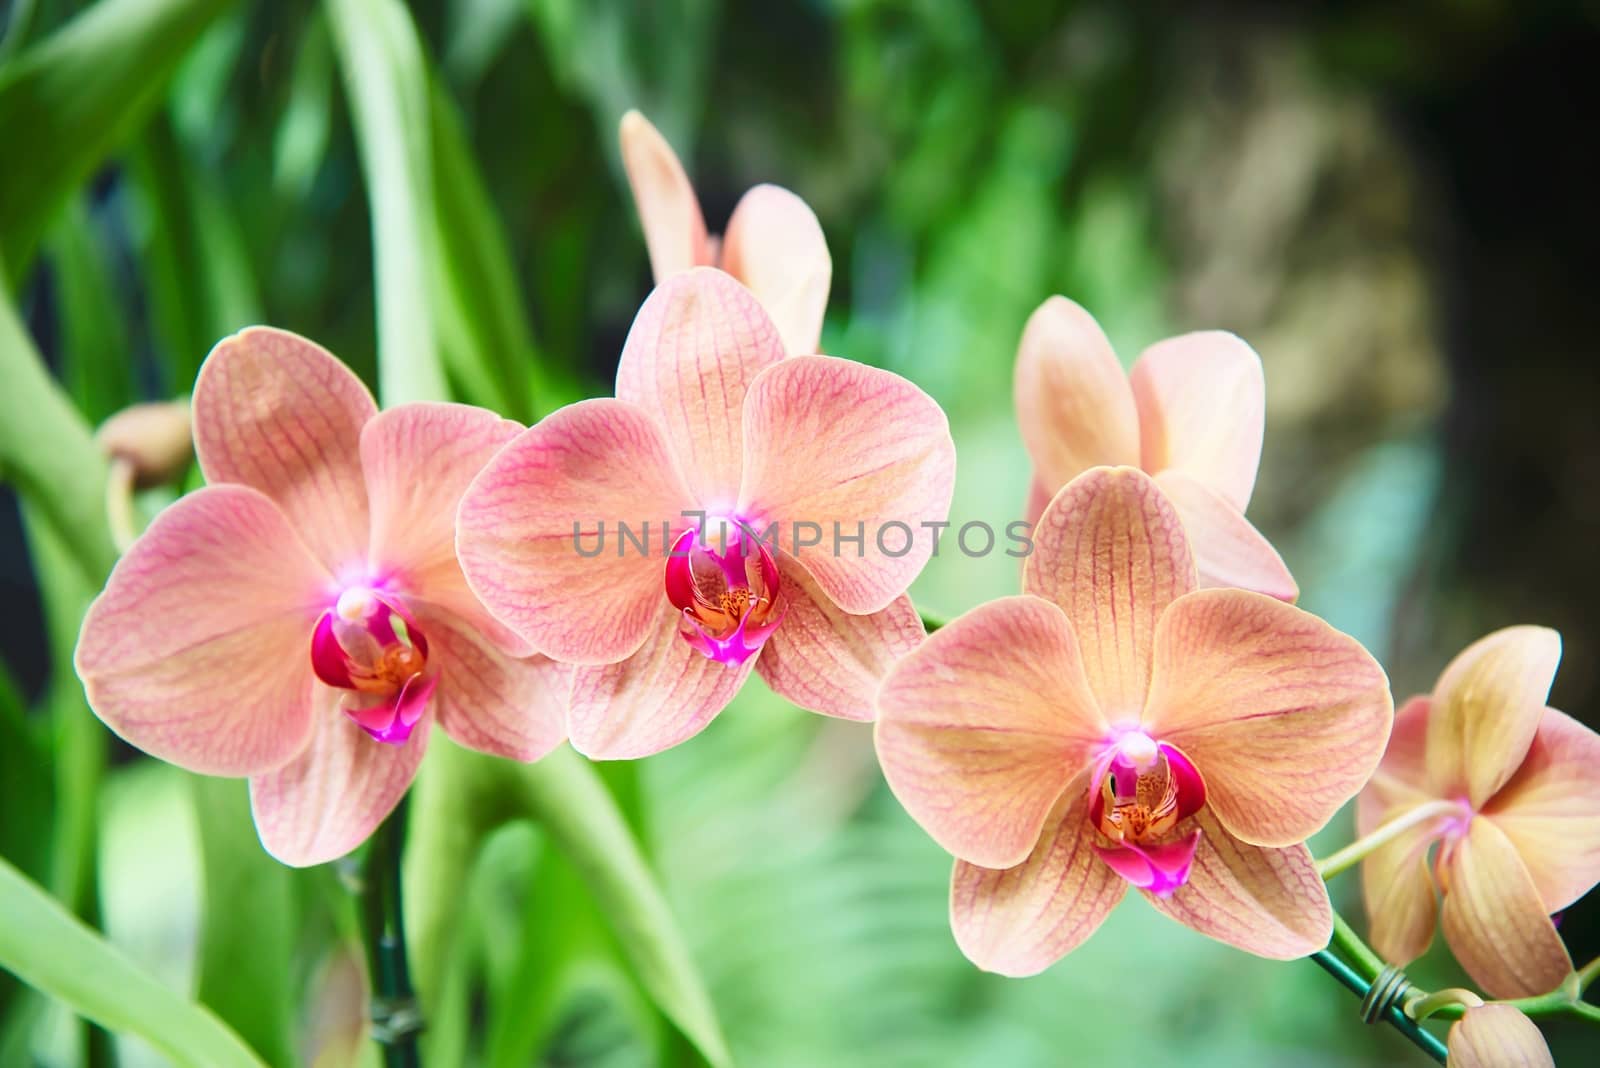 Light orange orchid with green leaf background - beautiful nature flower blossom concept